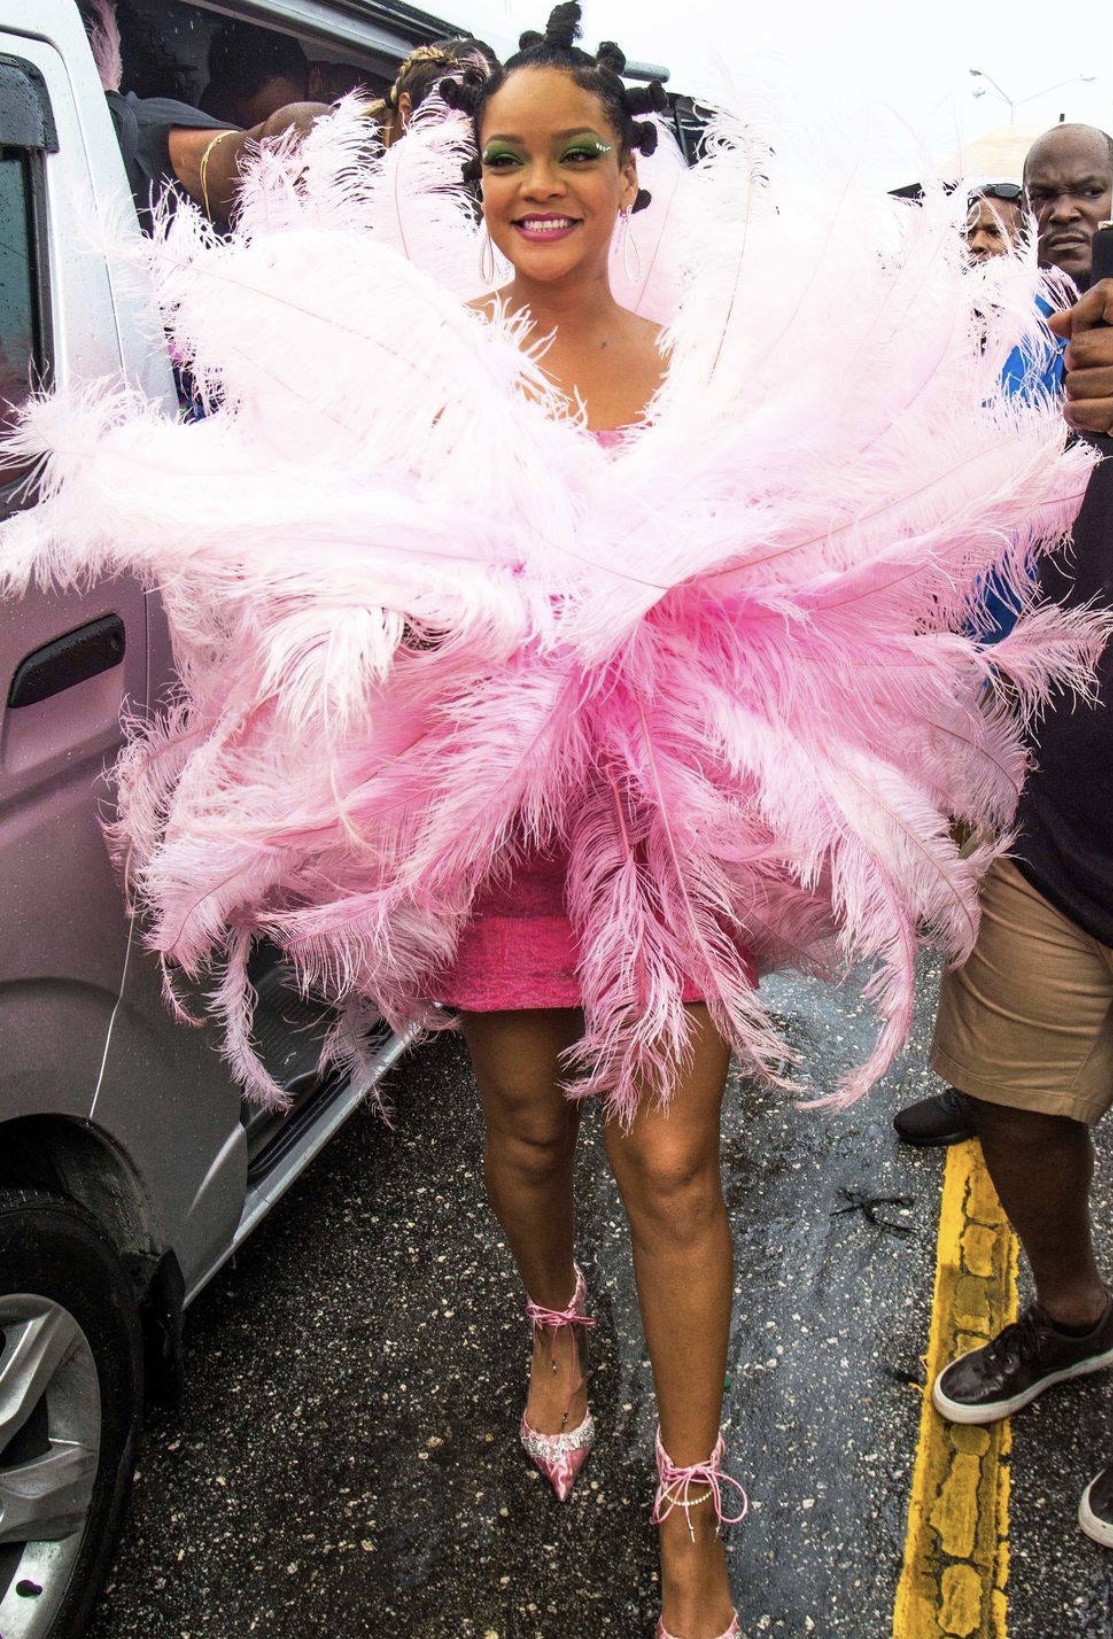 Rihanna “ switches it up” for Cropover 2019